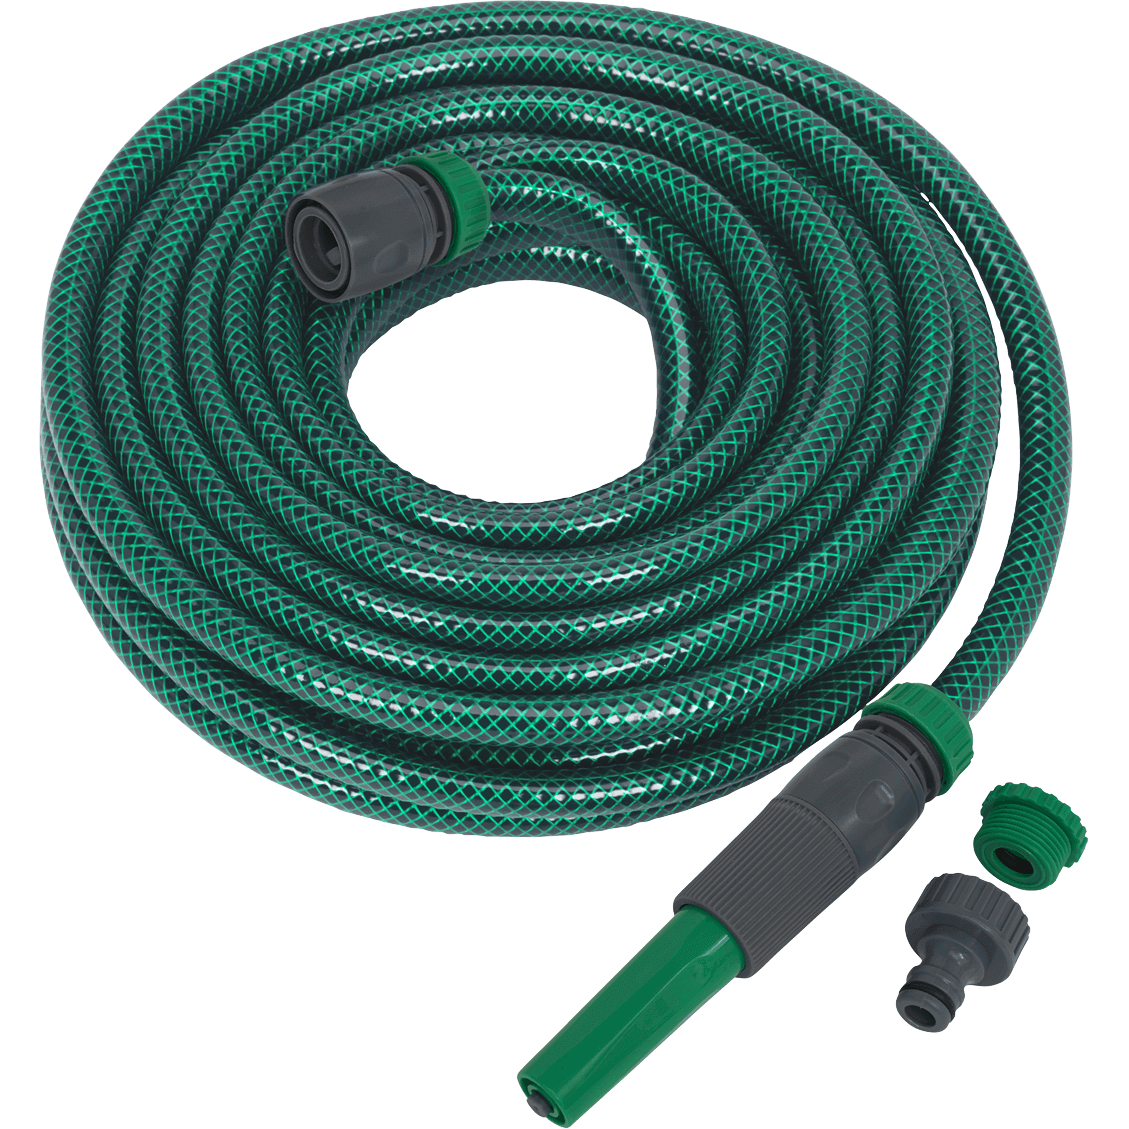 Sealey Garden Hose Pipe with Fittings 1/2" / 12.5mm 15m Green